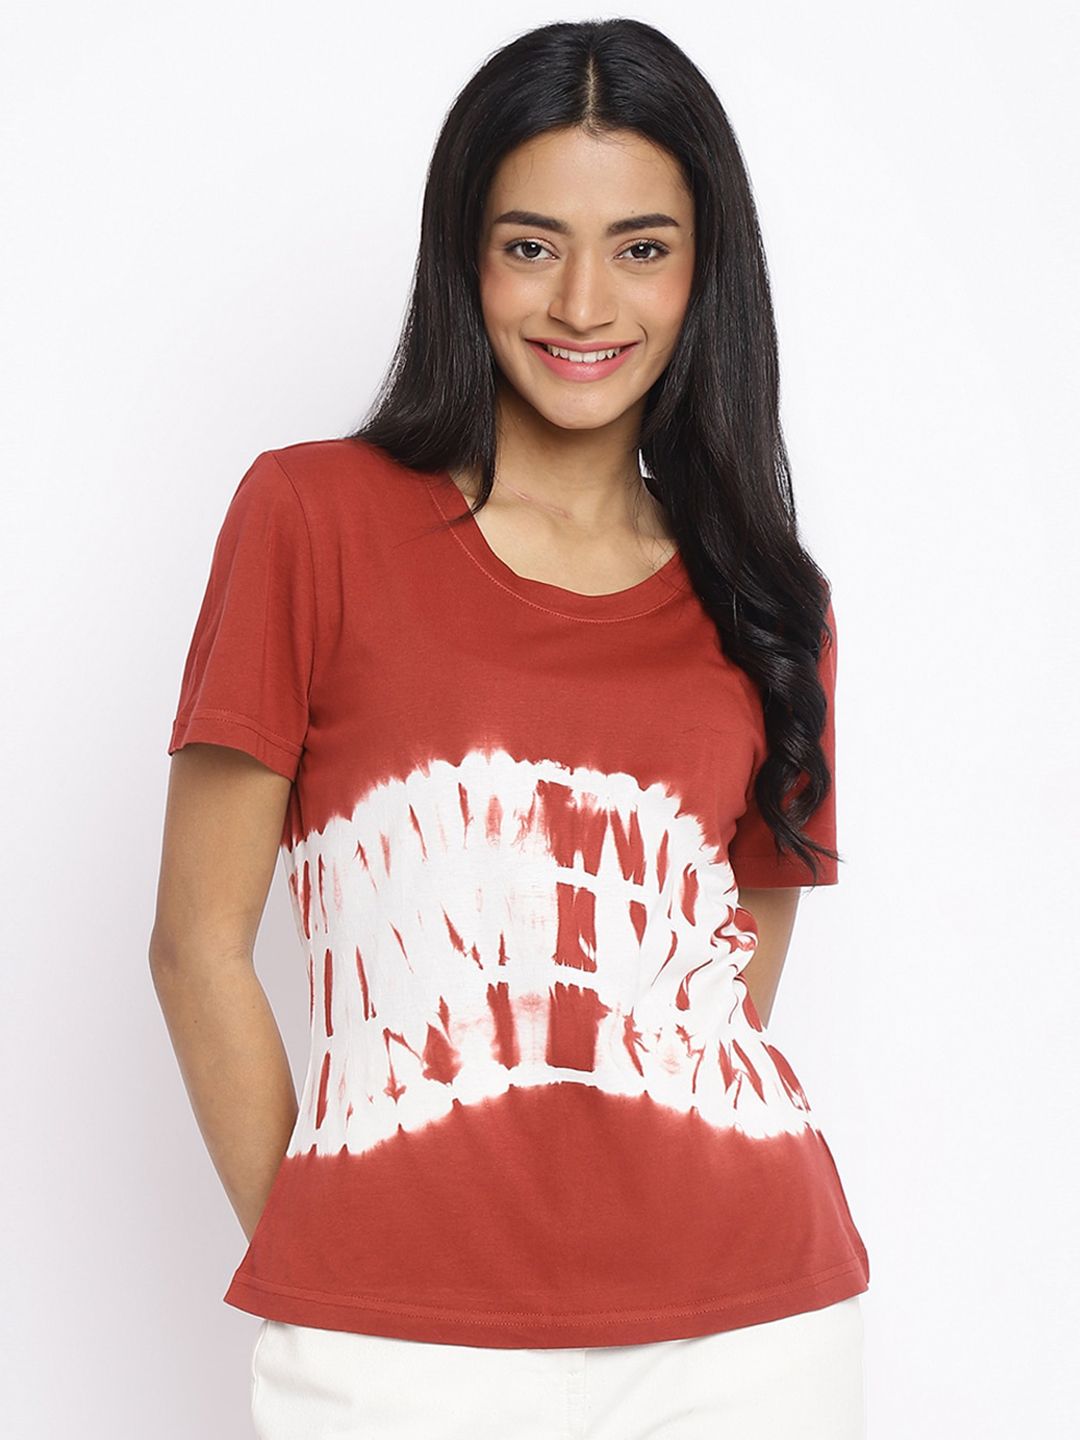 Fabindia Tie and Dye Cotton Top Price in India